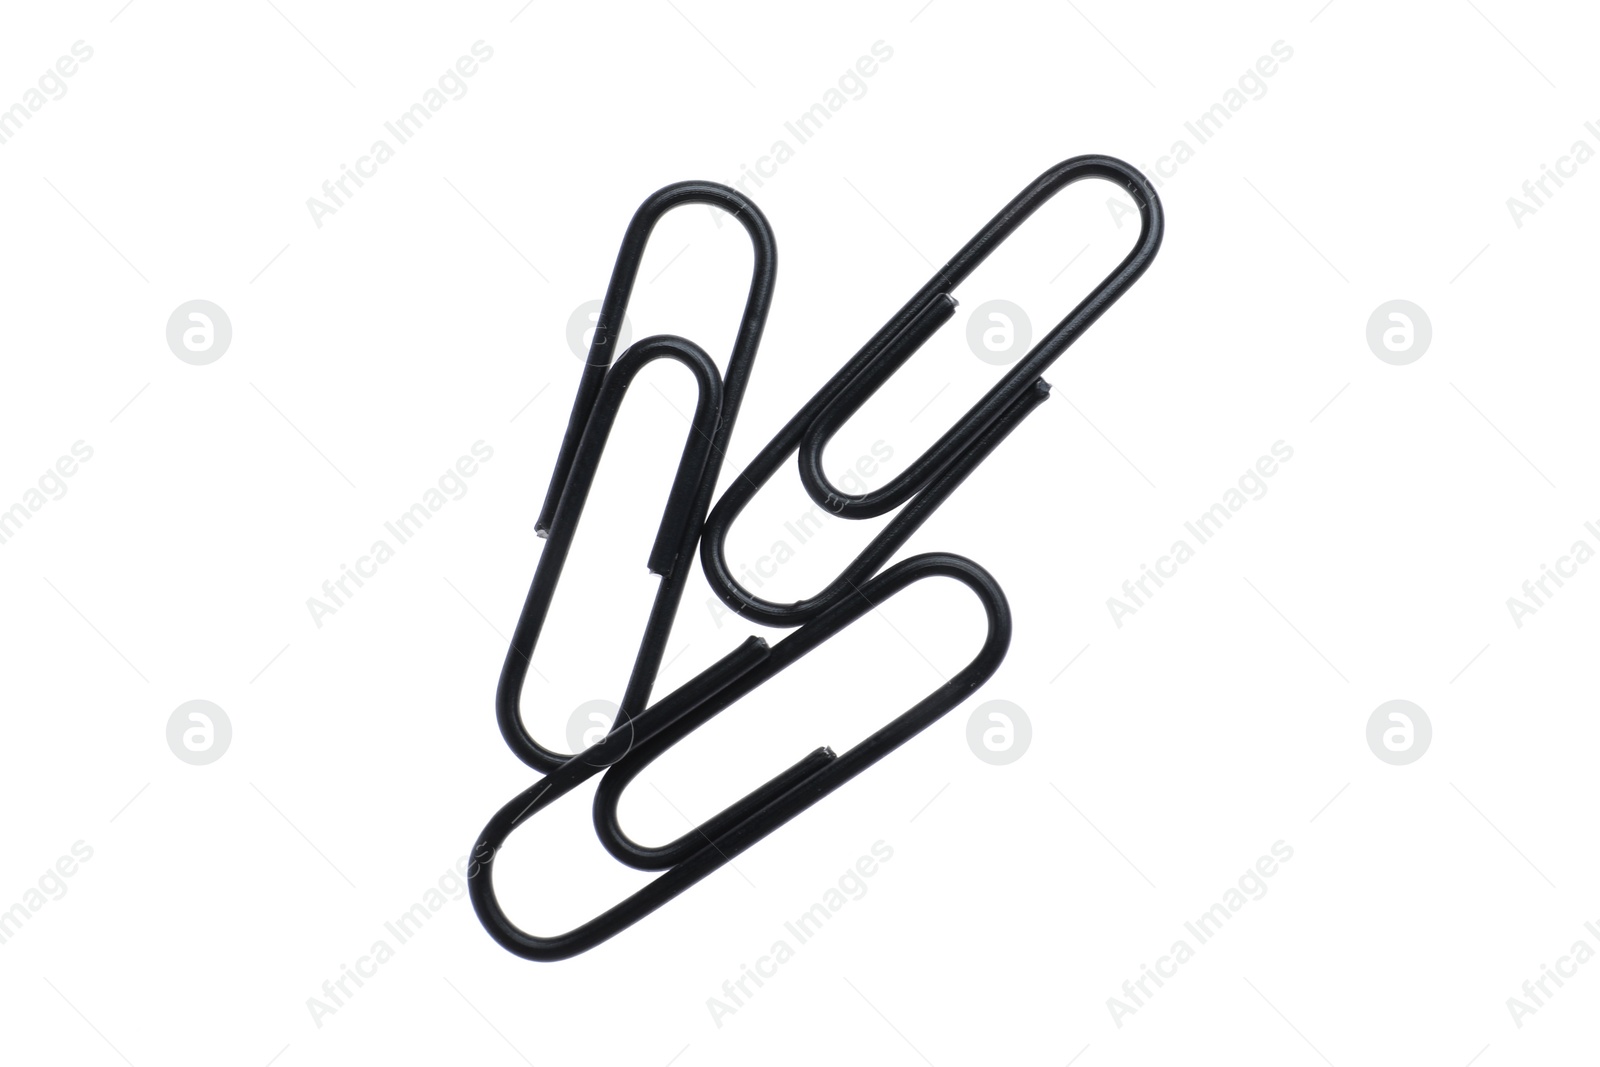 Photo of Colorful paper clips isolated on white, top view. School stationery